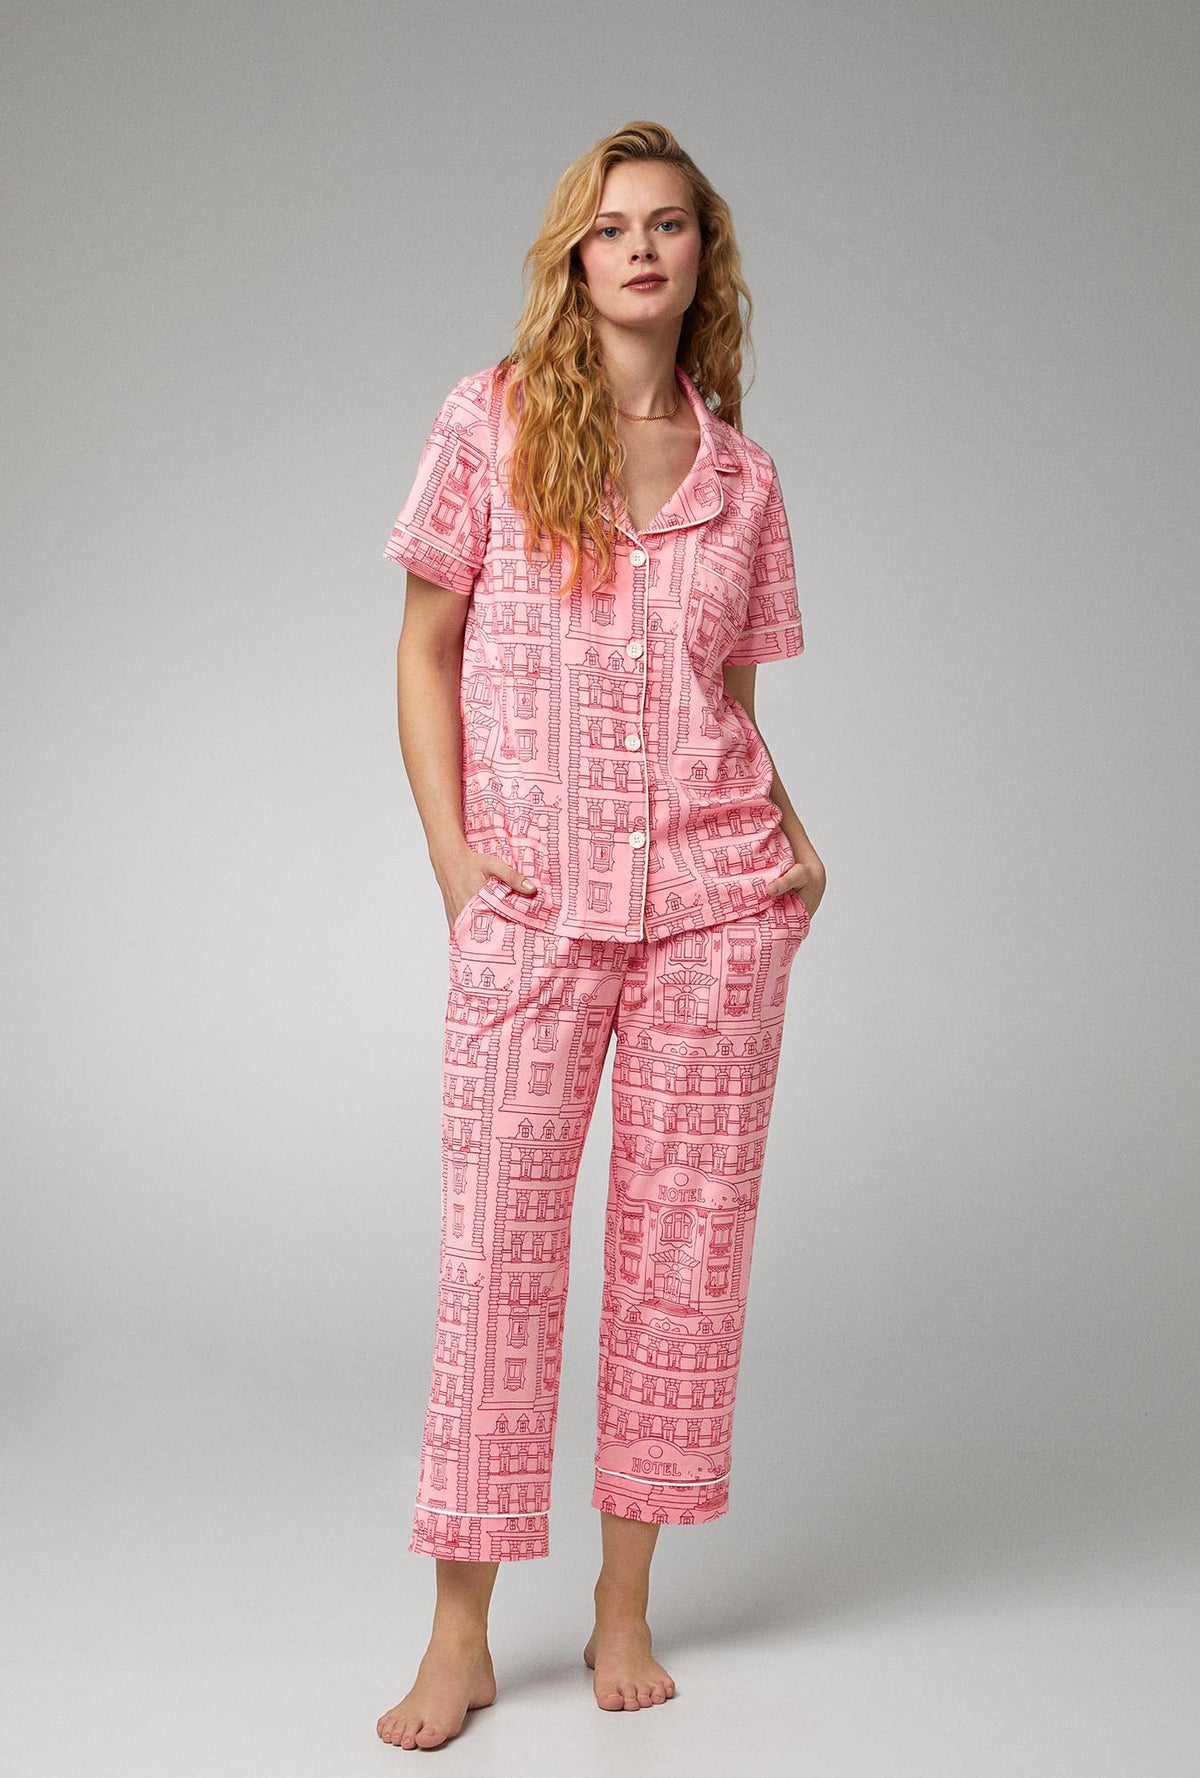 A lady wearing short sleeve classic stretch jersey cropped pj set with grand hotel print